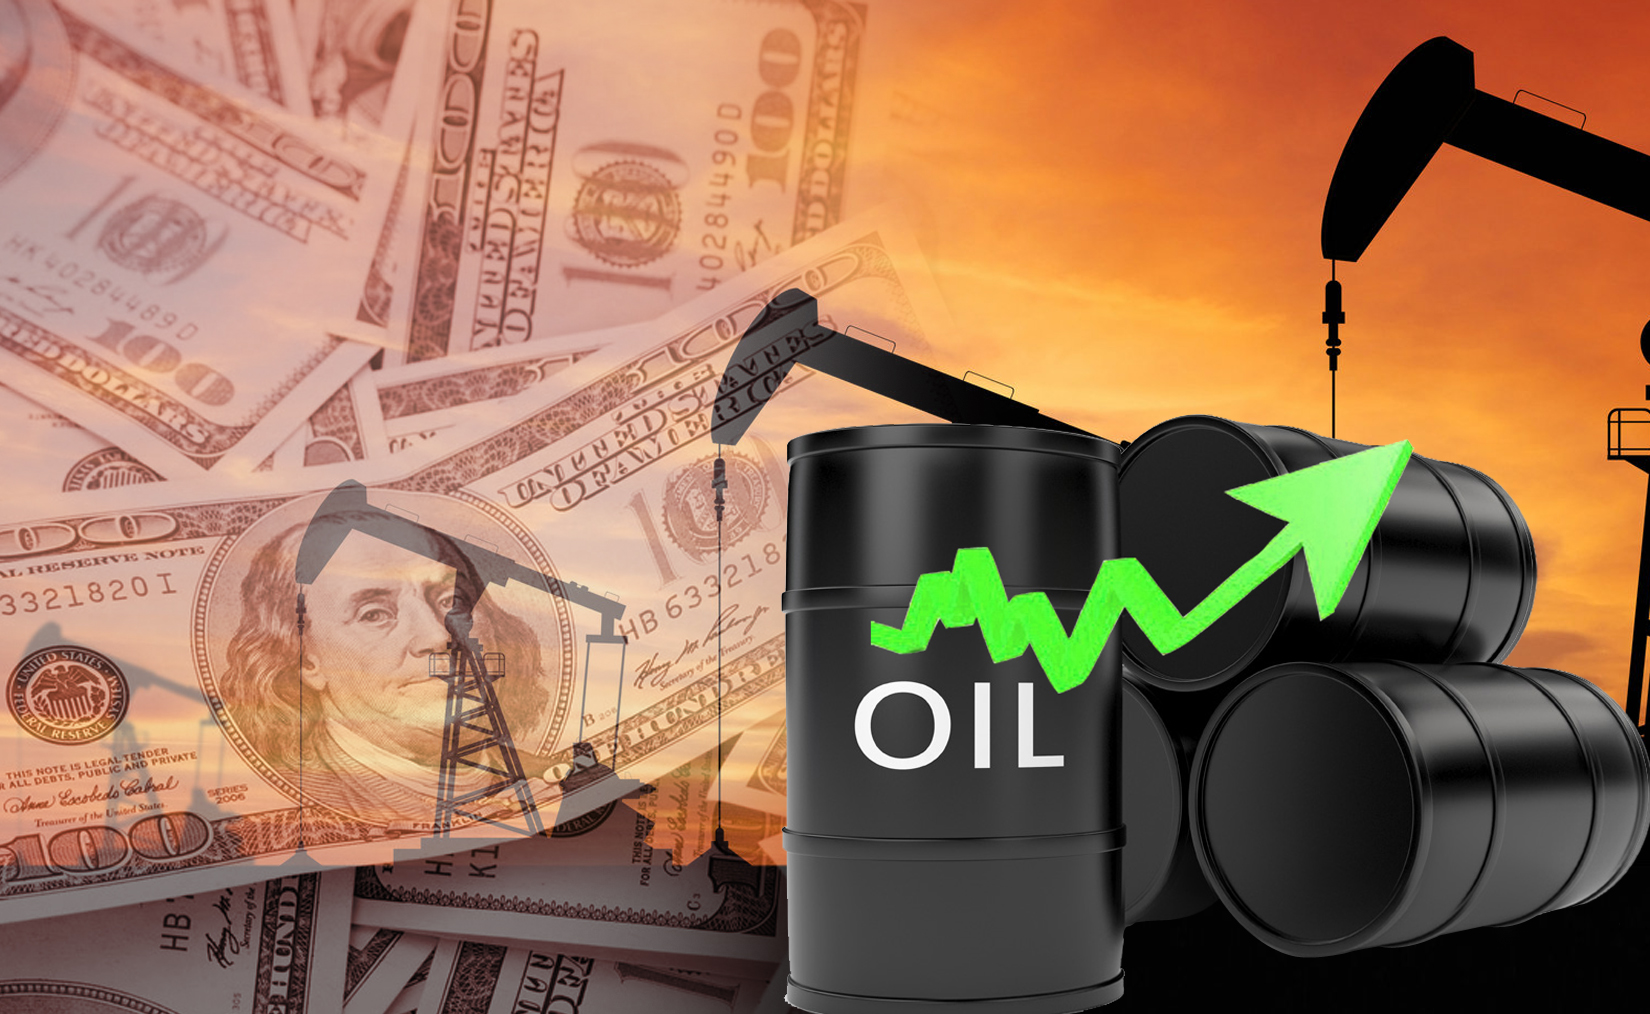 Kuwait oil price rises to USD 62.49 a barrel                                                                                                                                                                                                              